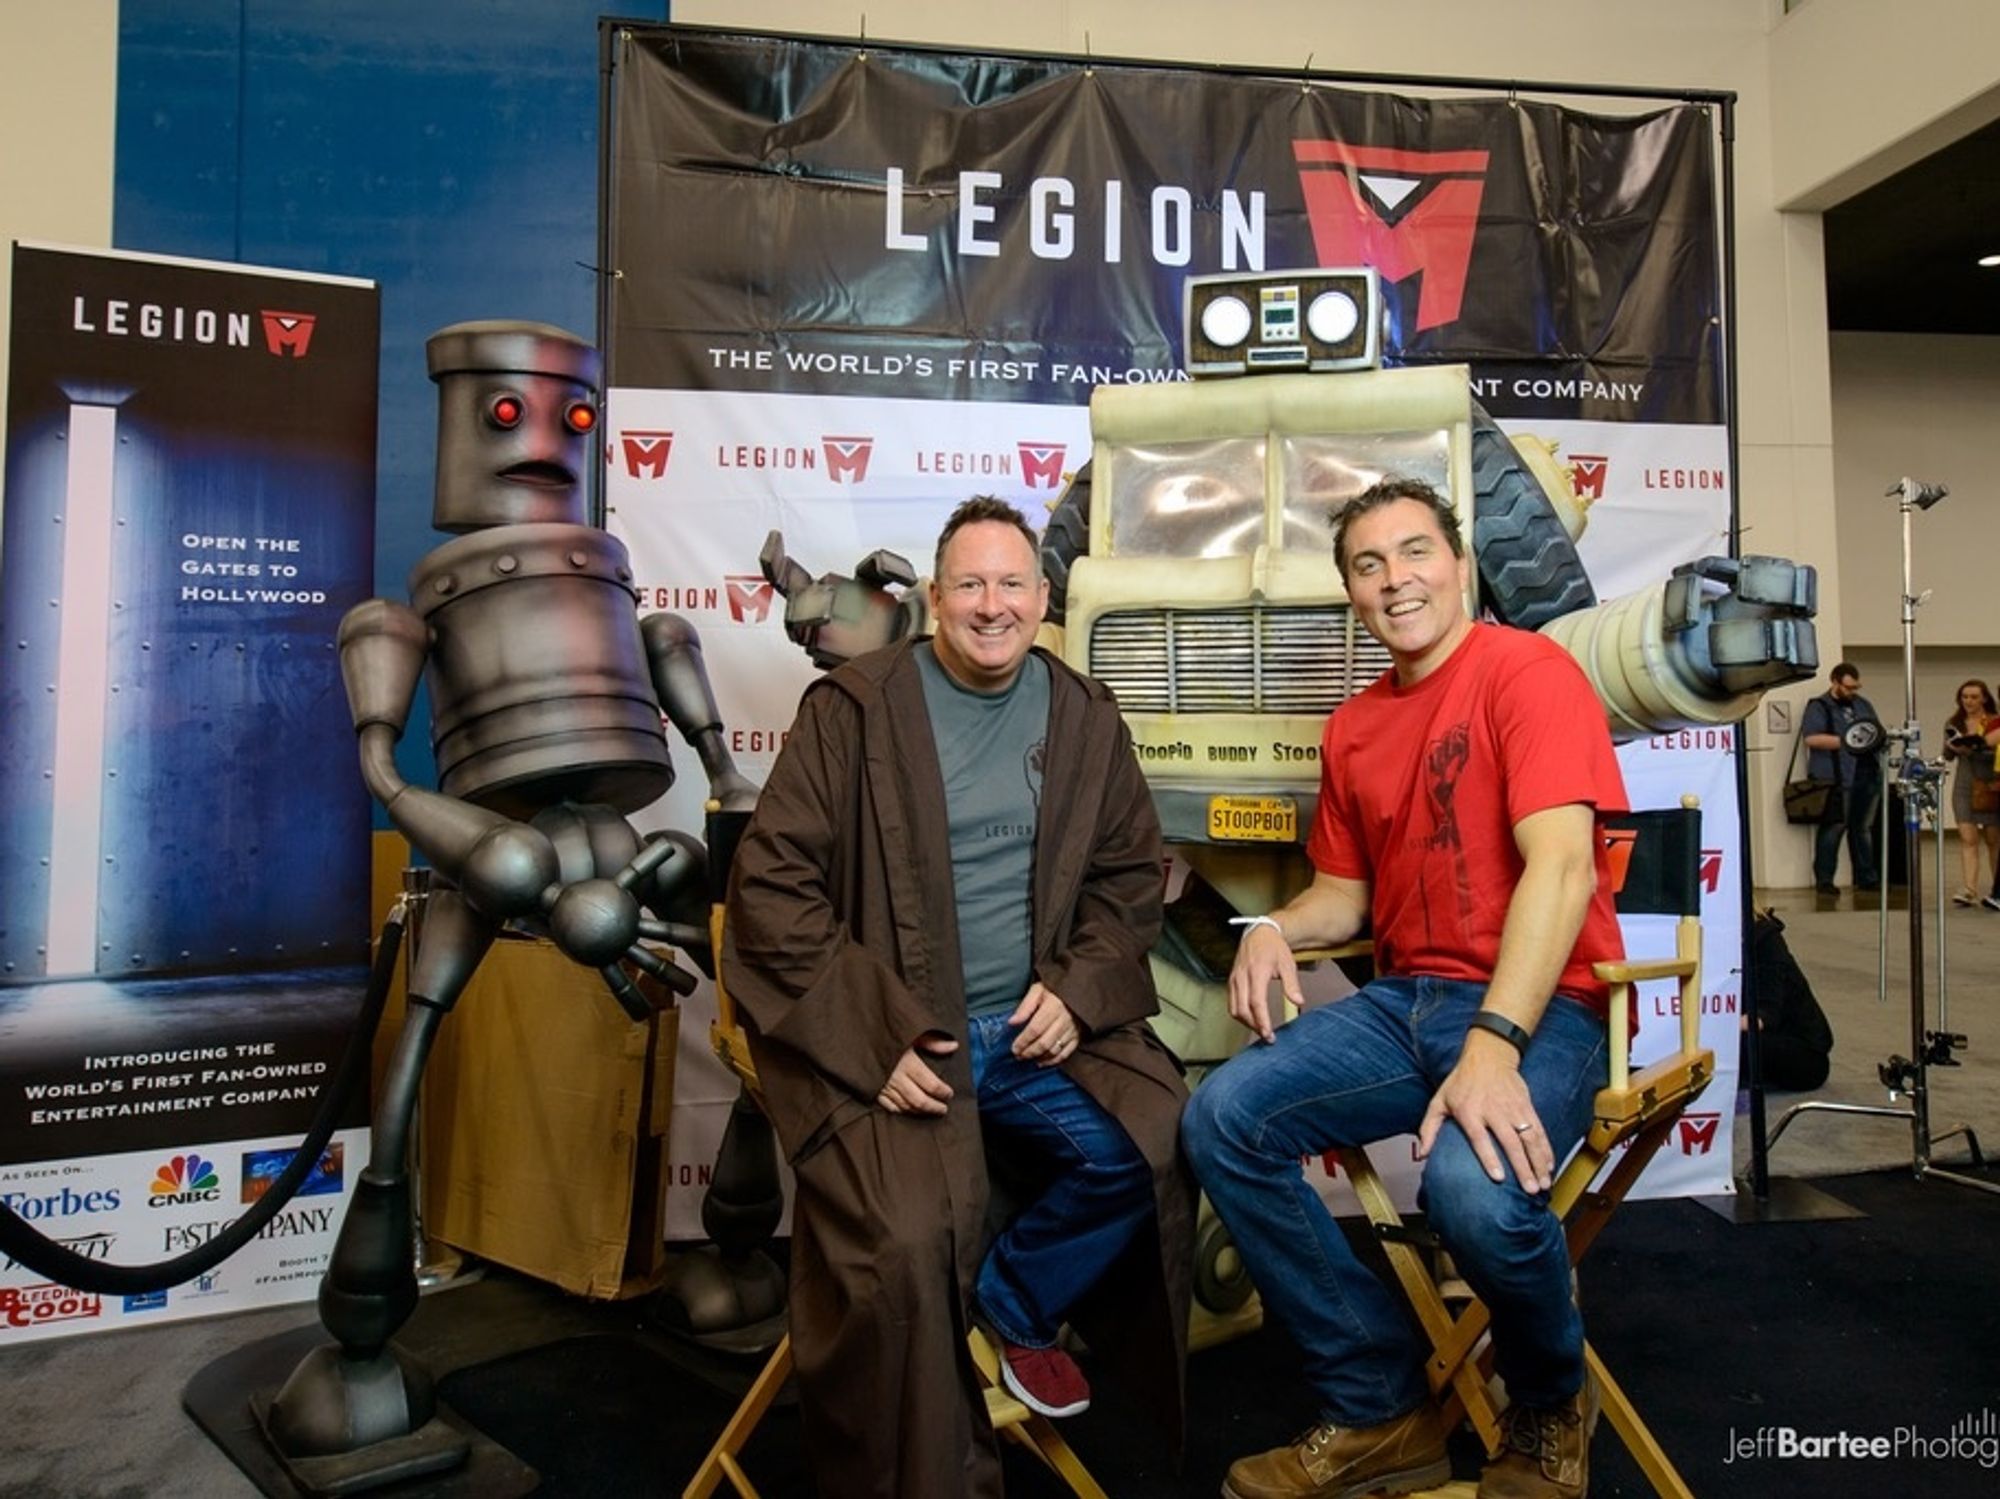 Just Go Grind Podcast: How Legion M Created the First Fan-Owned Entertainment Company